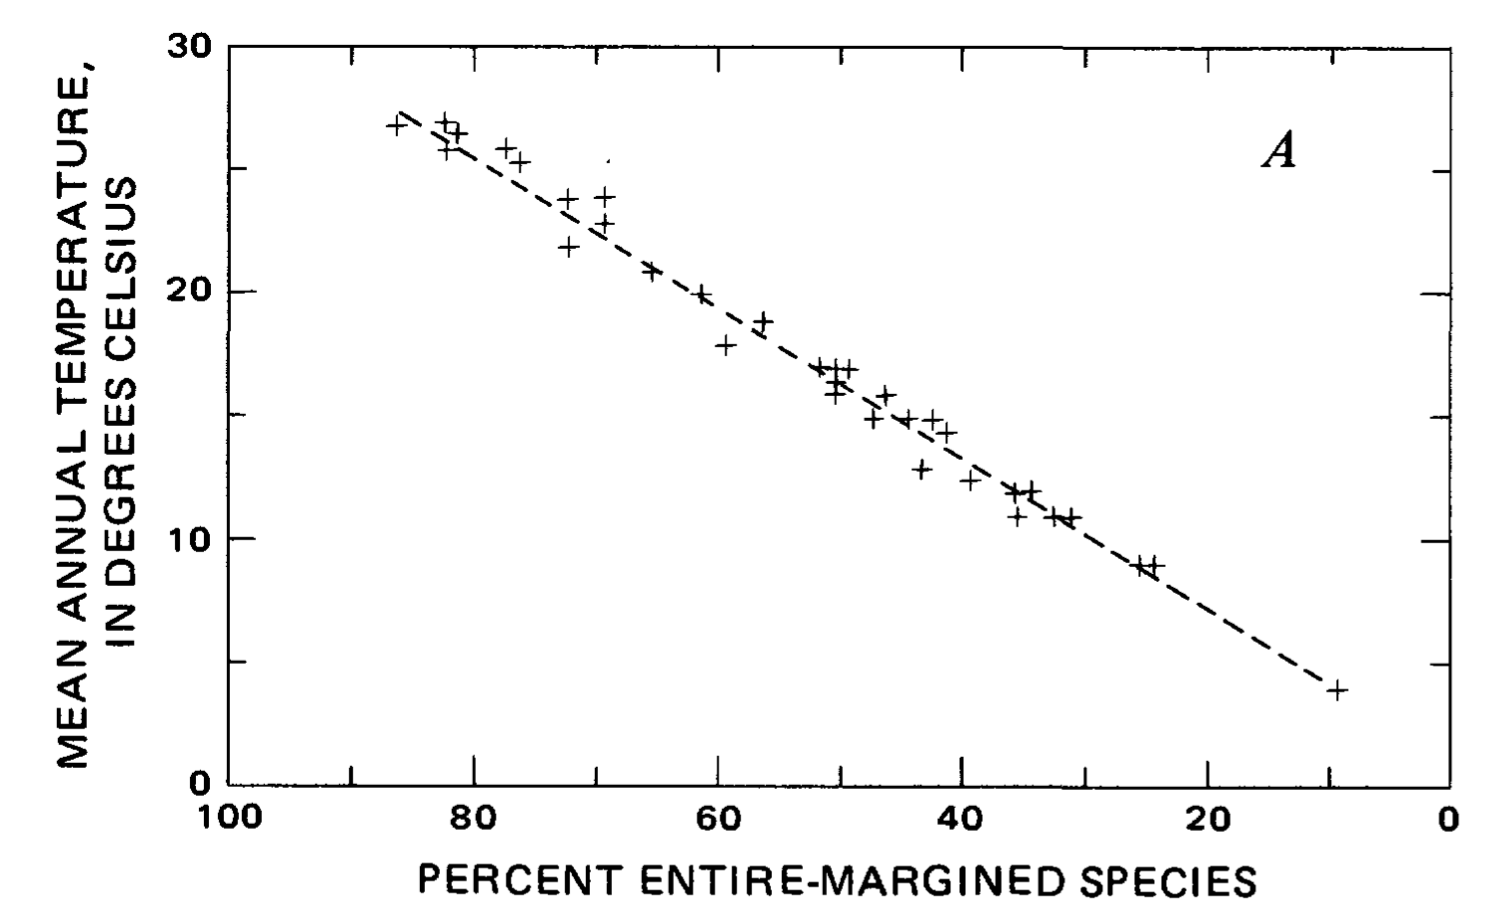 This graph, compiled by J.A. Wolfe, is based on "local floras in the humid to mesic forests of eastern Asia." The plus-signs are data points. The dotted line is a regression line that has been fitted to the data. The graph shows a linear, positive correlation between percent entire-margined species and mean annual temperature.